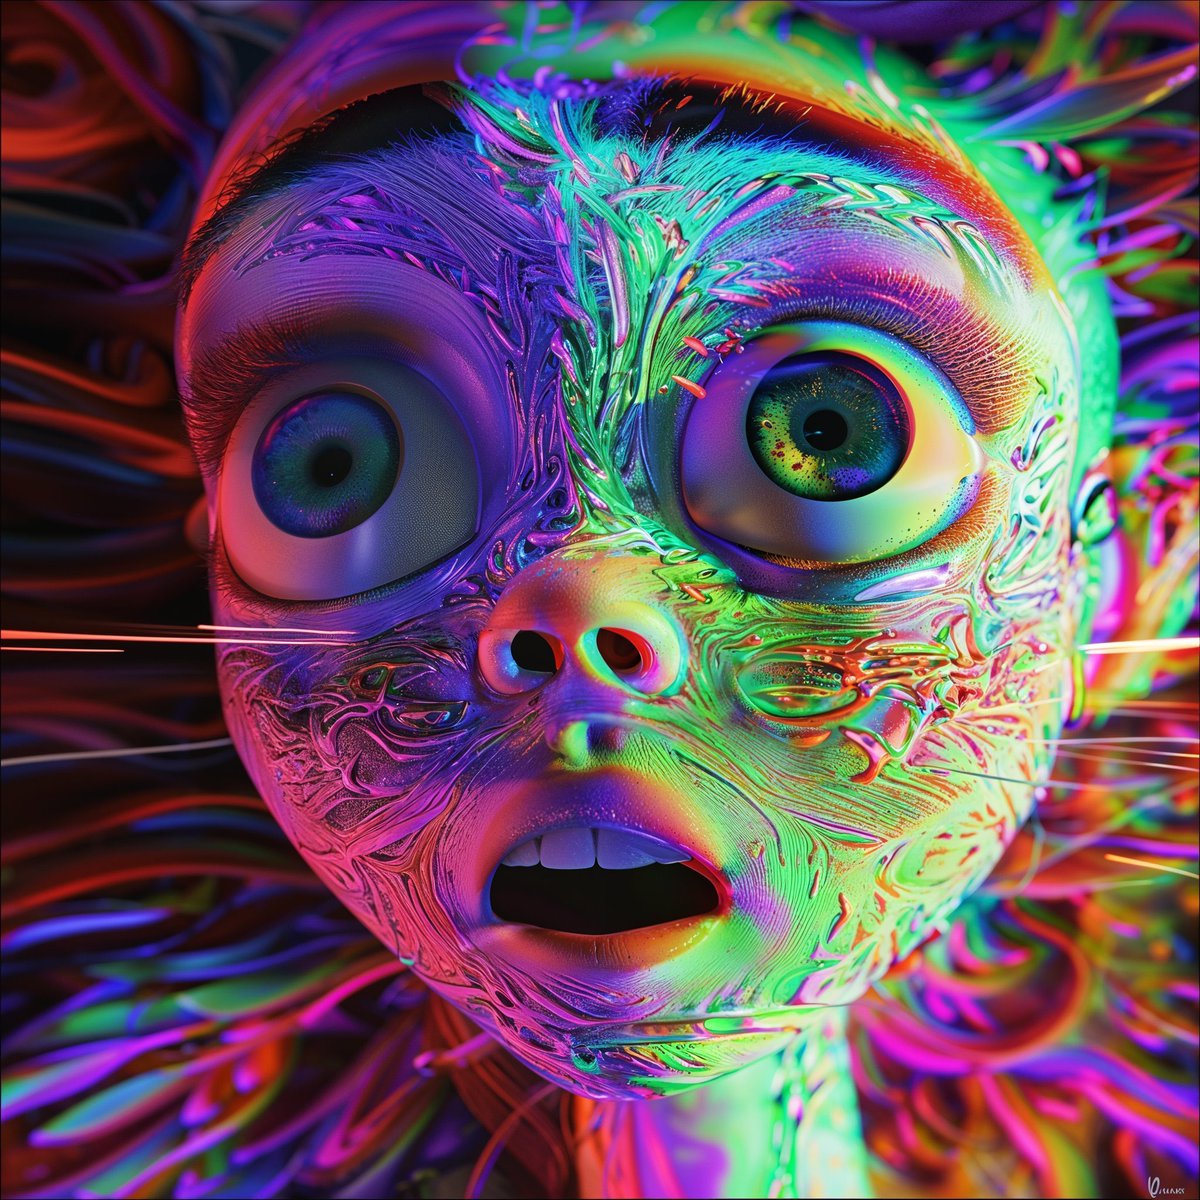 I used Midjourney v6 to create depictions of 11 different substances in the style of Pixar animations. The results are unreal. 1. LSD